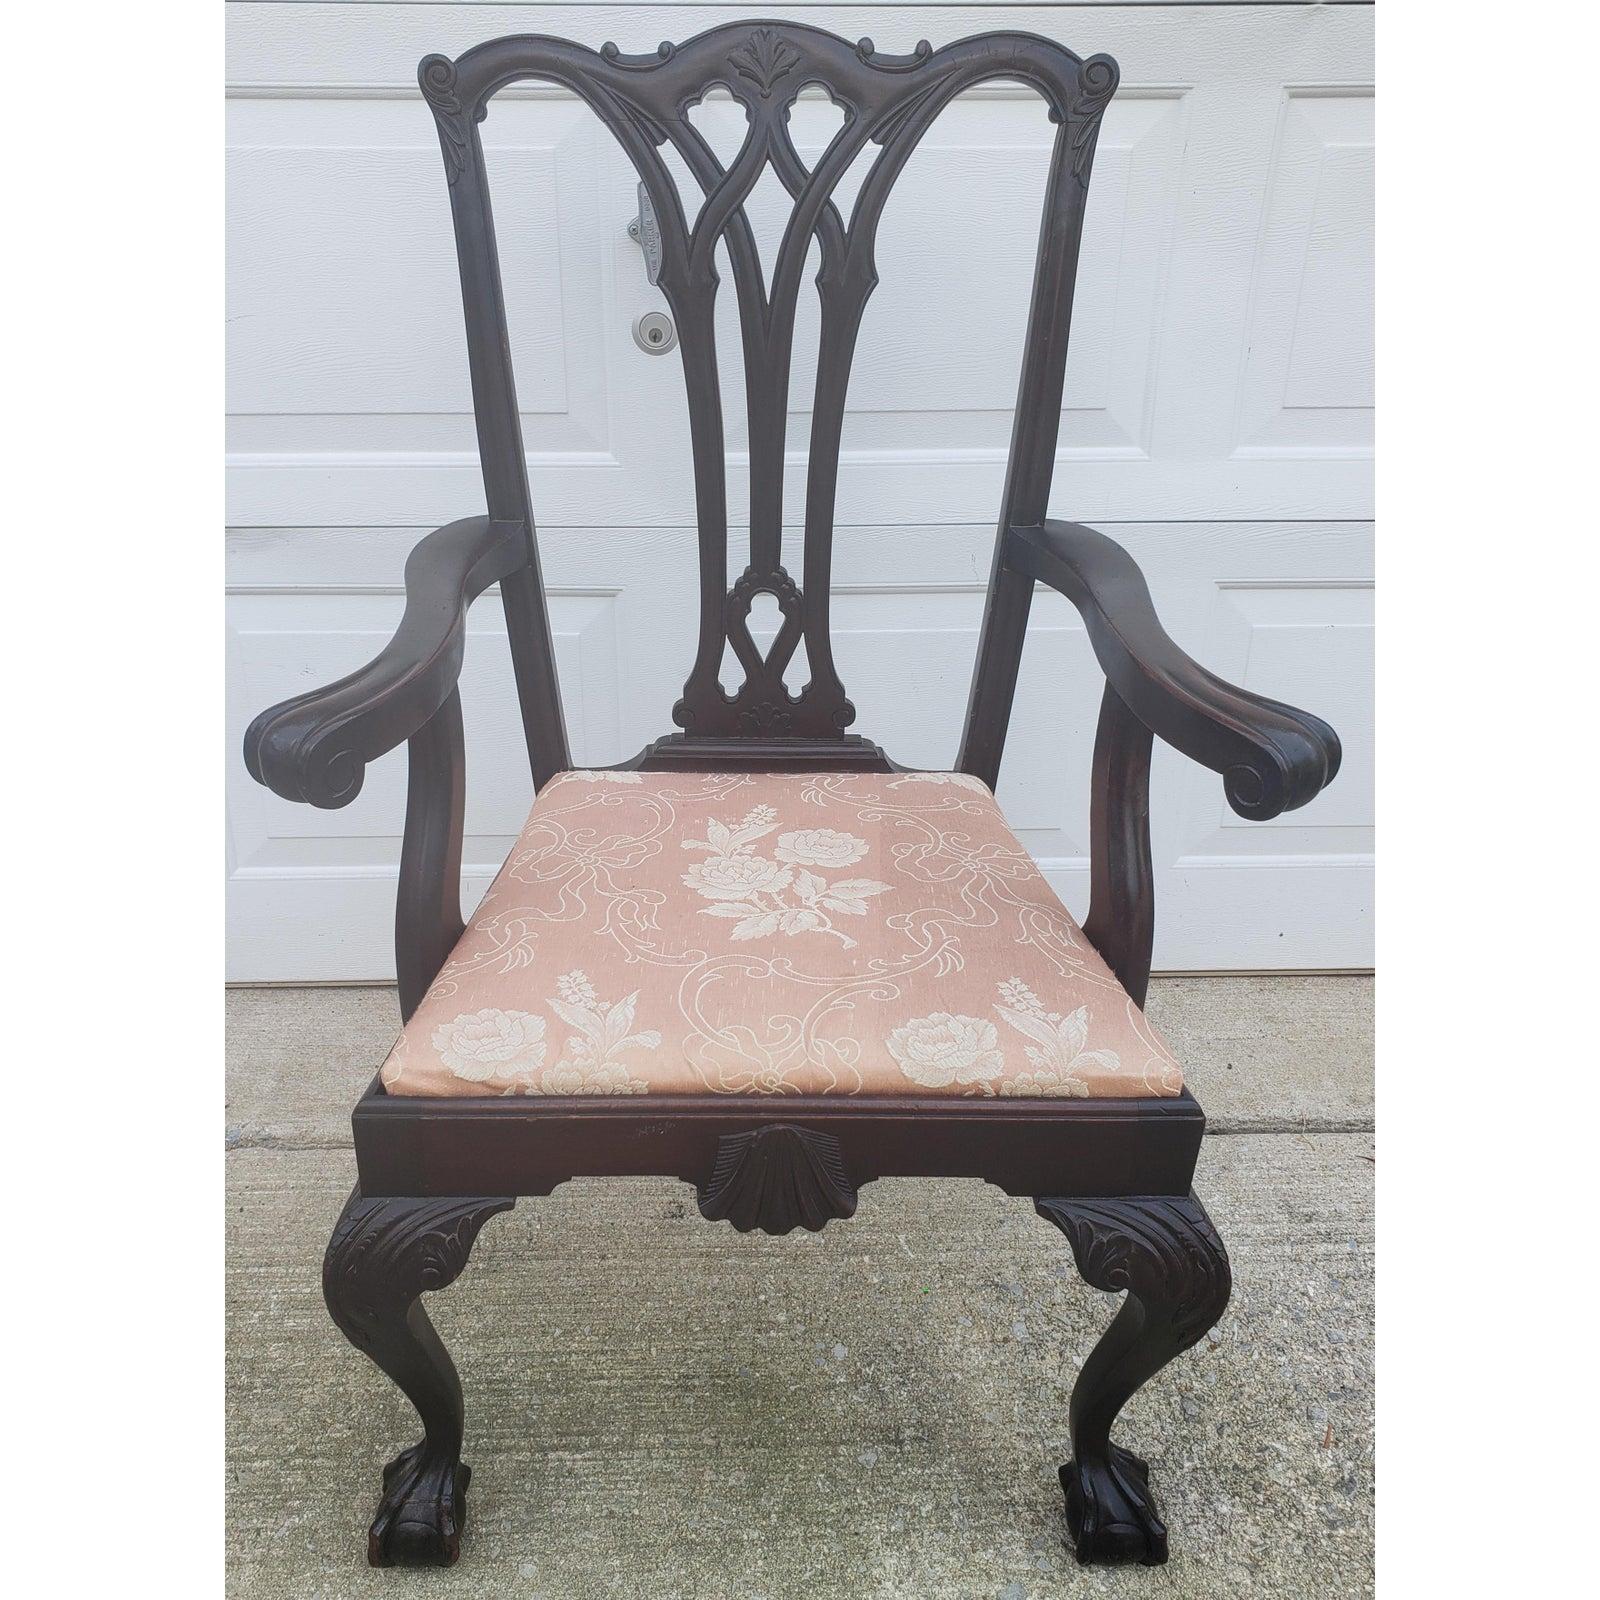 Chippendale style antique 1920's carved mahogany armchair.
This chair is very sturdy and in good condition.
Some scuffs here and there consistent with age and normal use. Measurements are 27.5